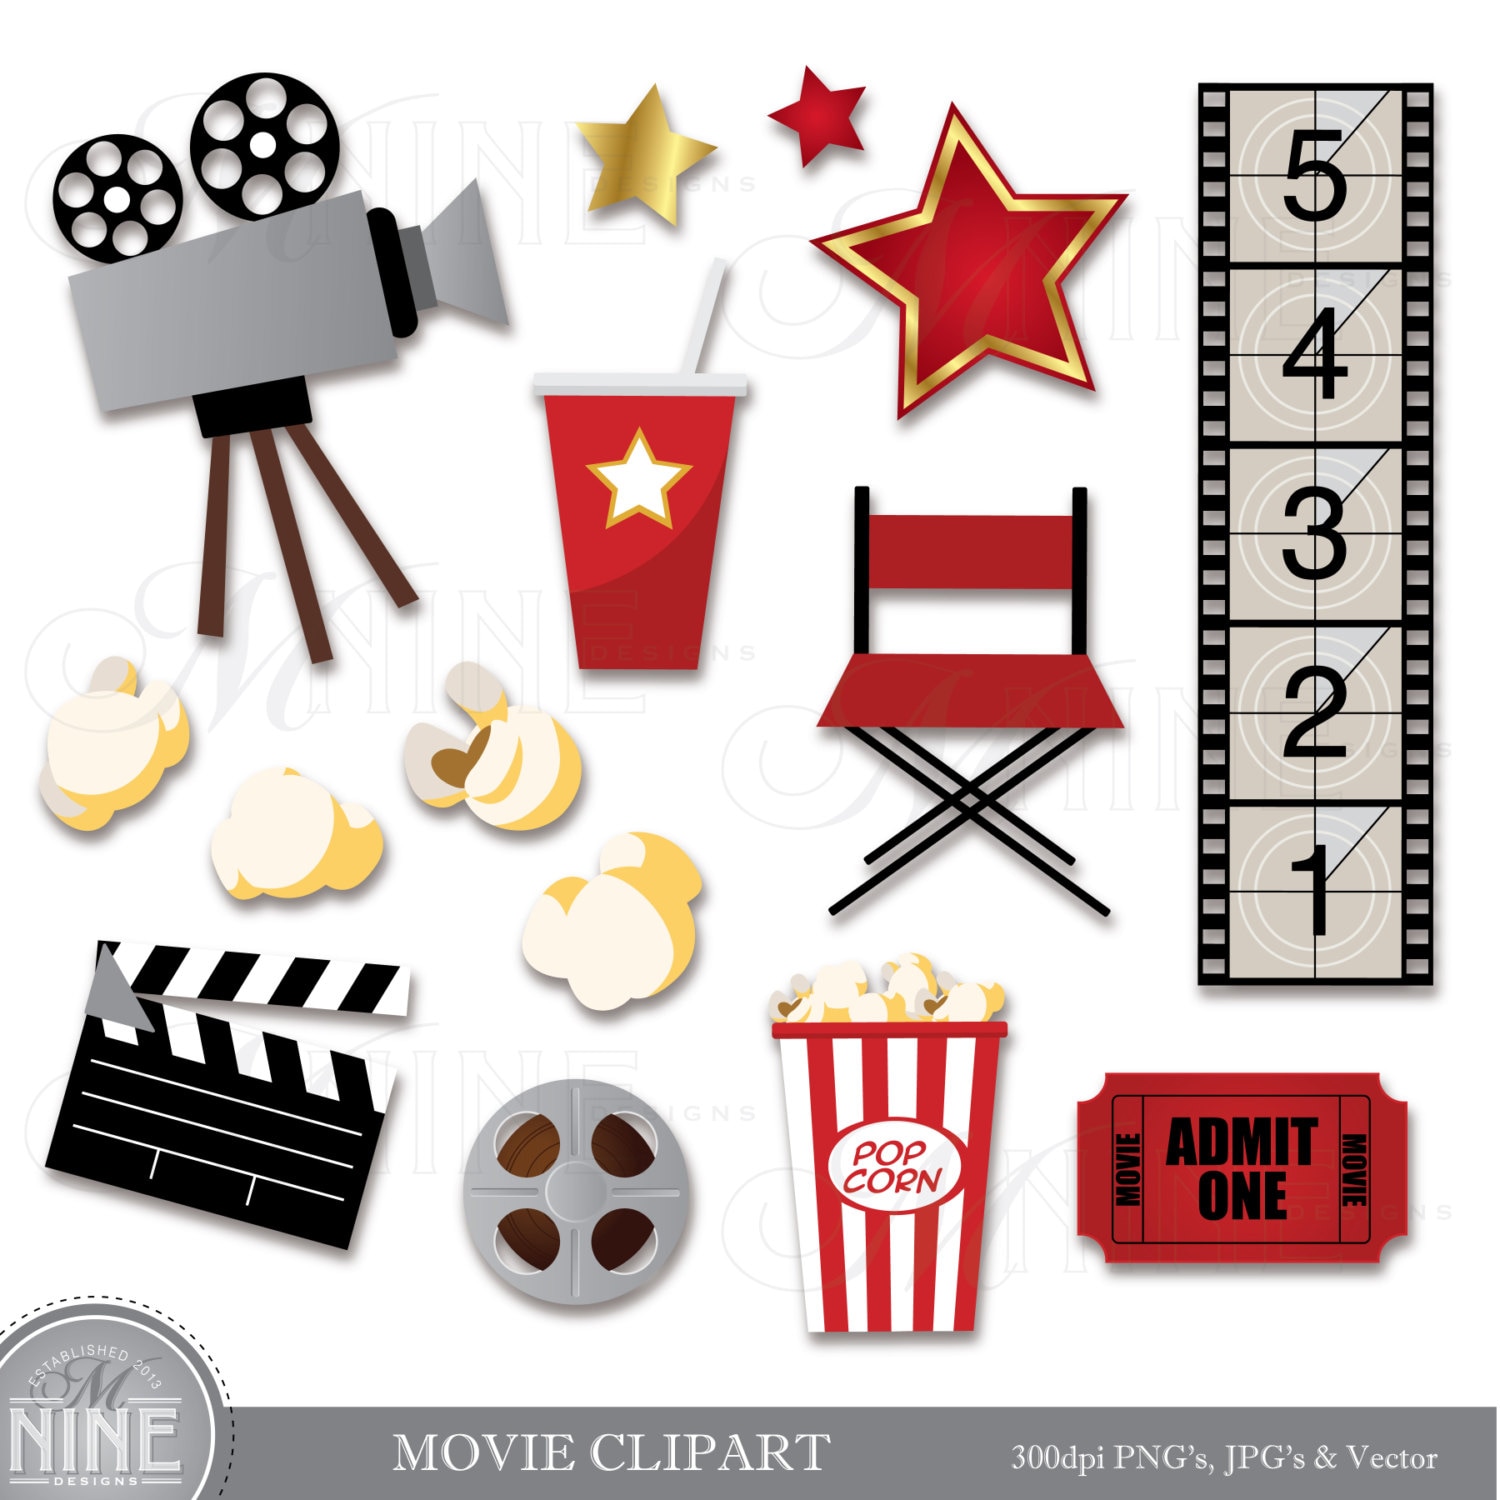 movie clipart free download - photo #30